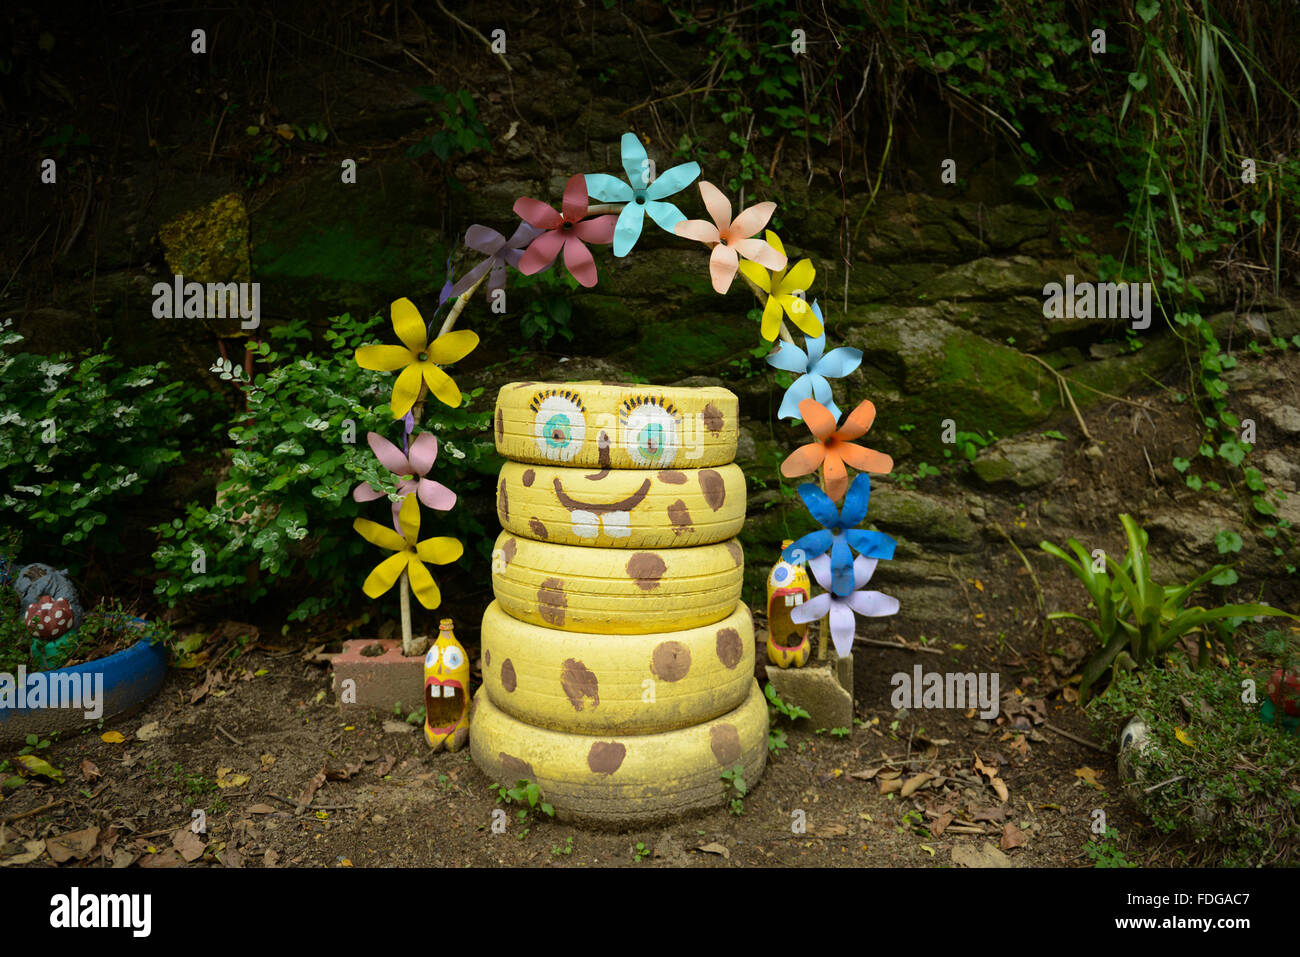 Garden decorations made out of recycled objects. PUERTO RICO - Utuado. Caribbean Island. US territory. Stock Photo